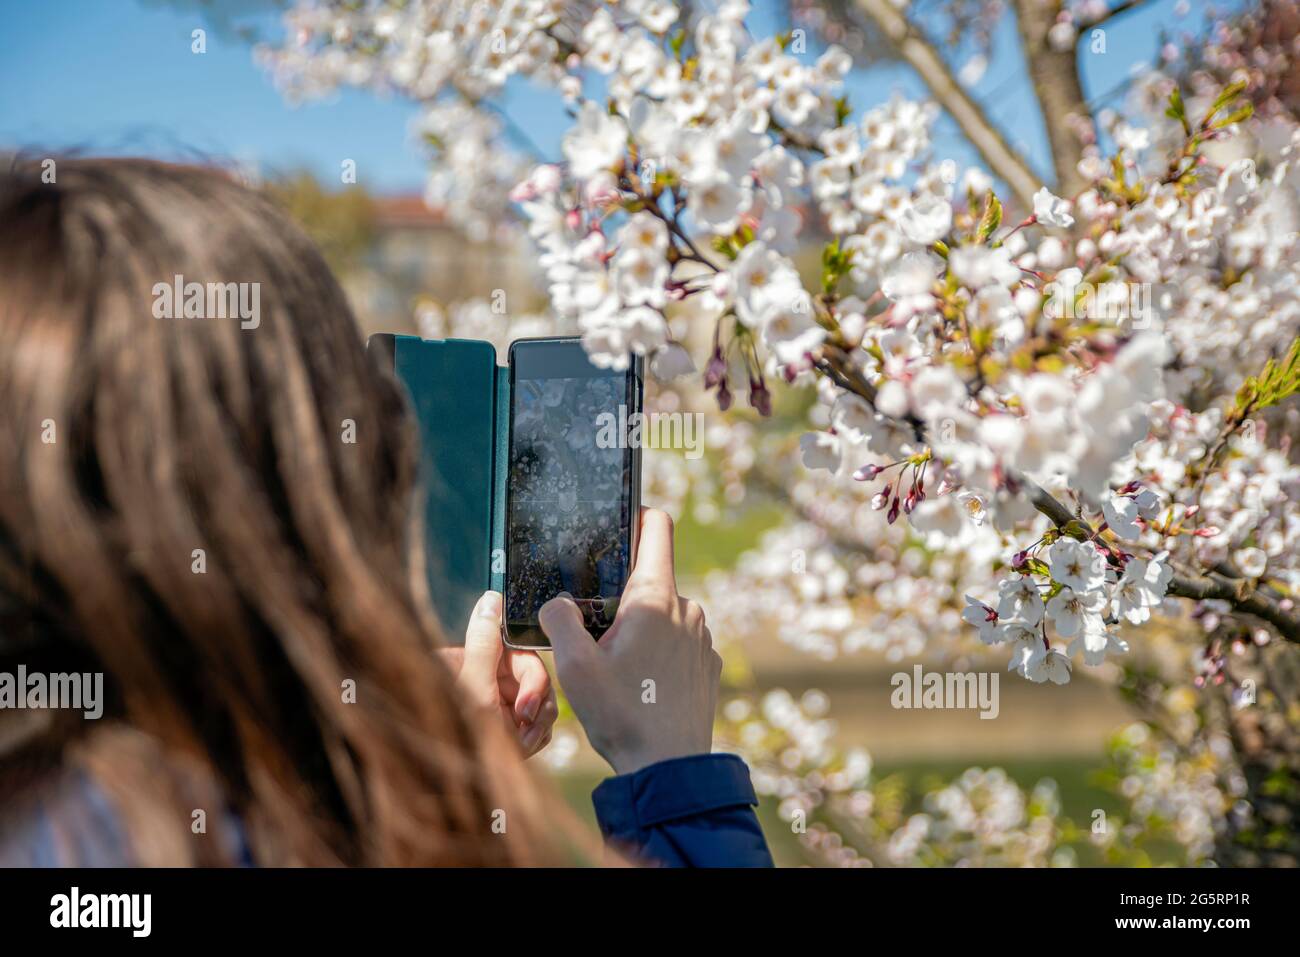 Tourist woman travels in Japan taking pictures of sakura blossom using a mobile phone camera. Spring cherry blossom season. Stock Photo